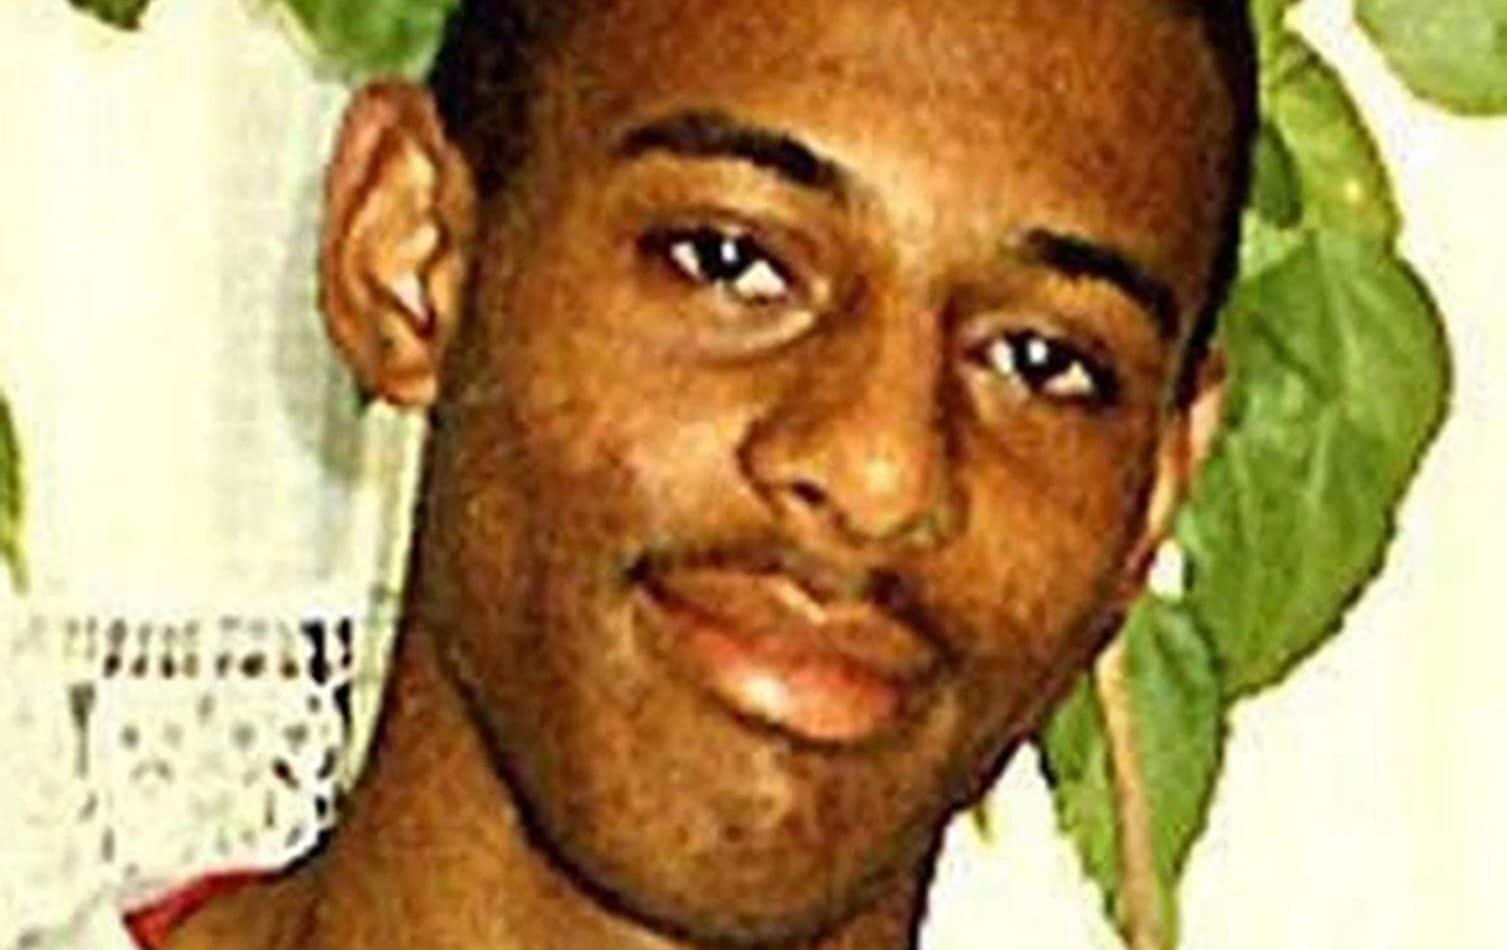 Stephen Lawrence’s father ‘appalled’ at decision to move son’s body from Jamaica